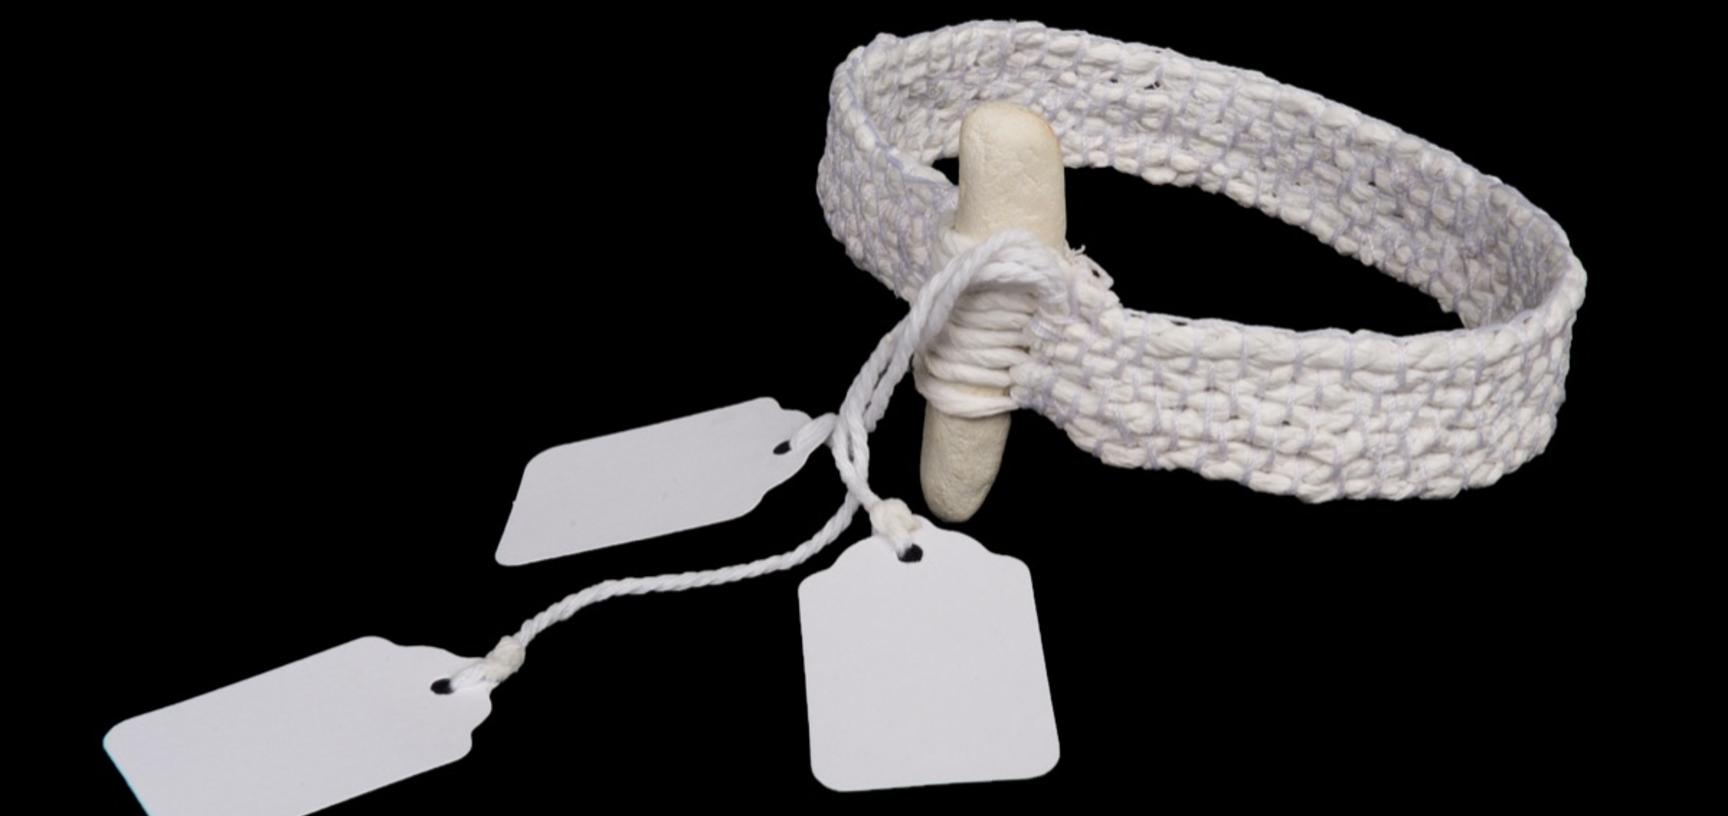 Arm band made from woven white material with small white parcel tags attached.